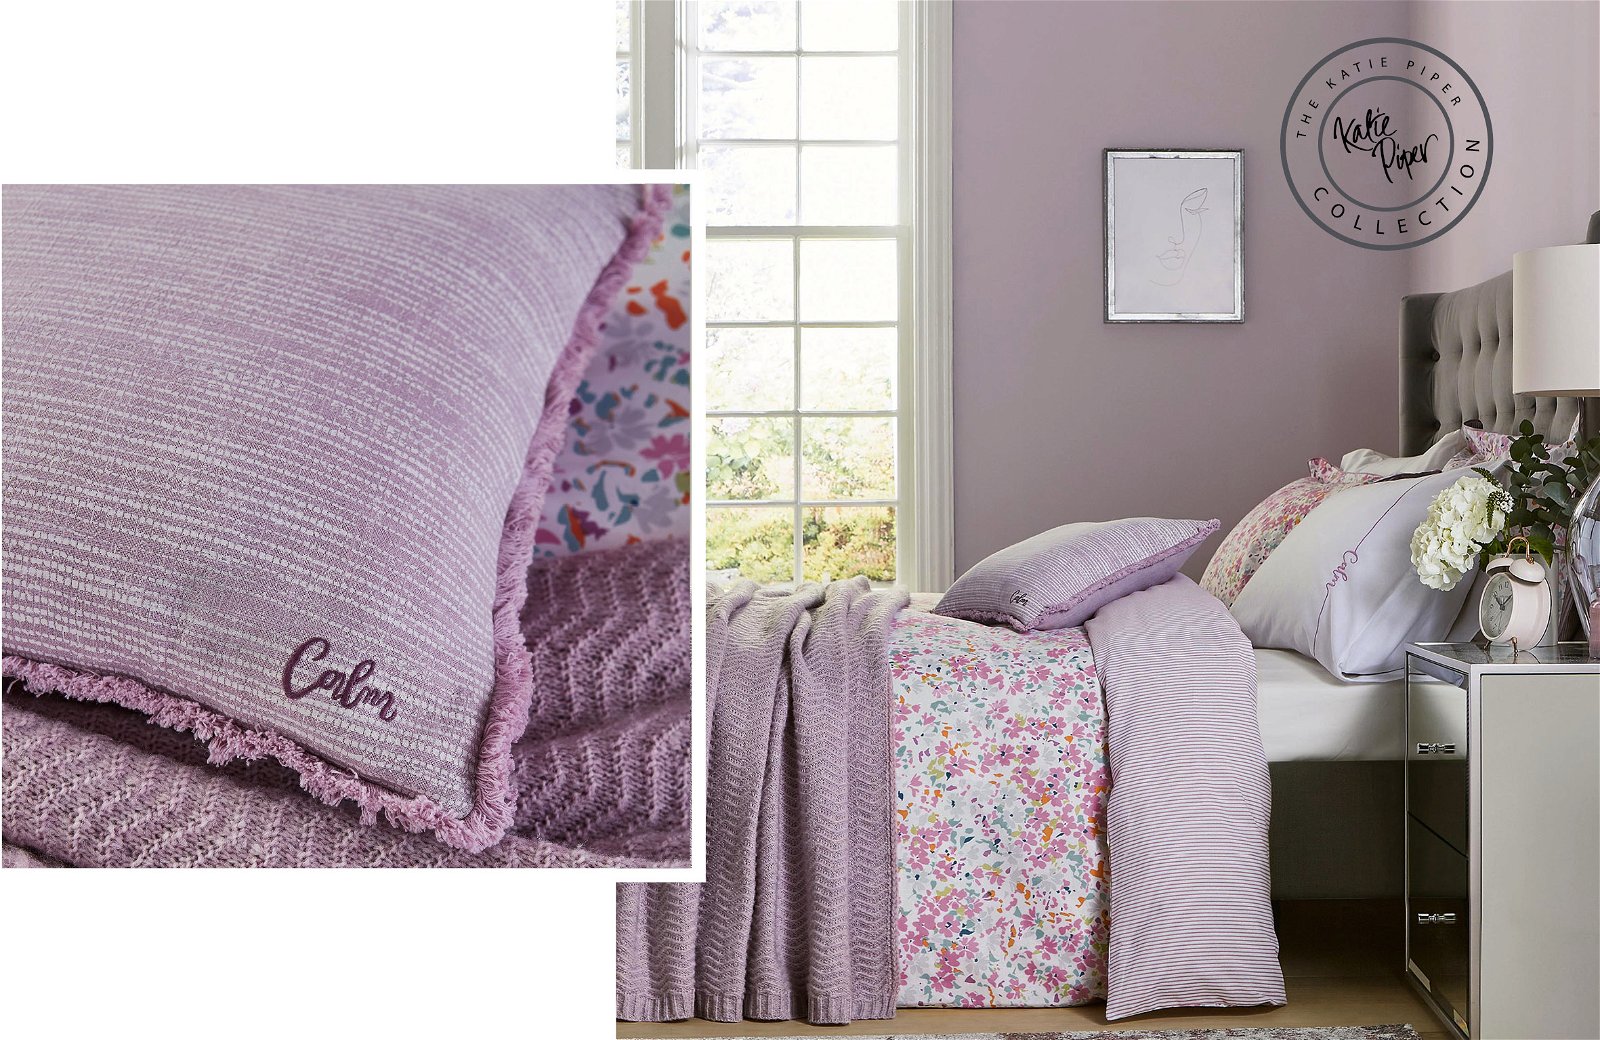 Katie Piper Calm Daisy Bedding in Pink/Lilac